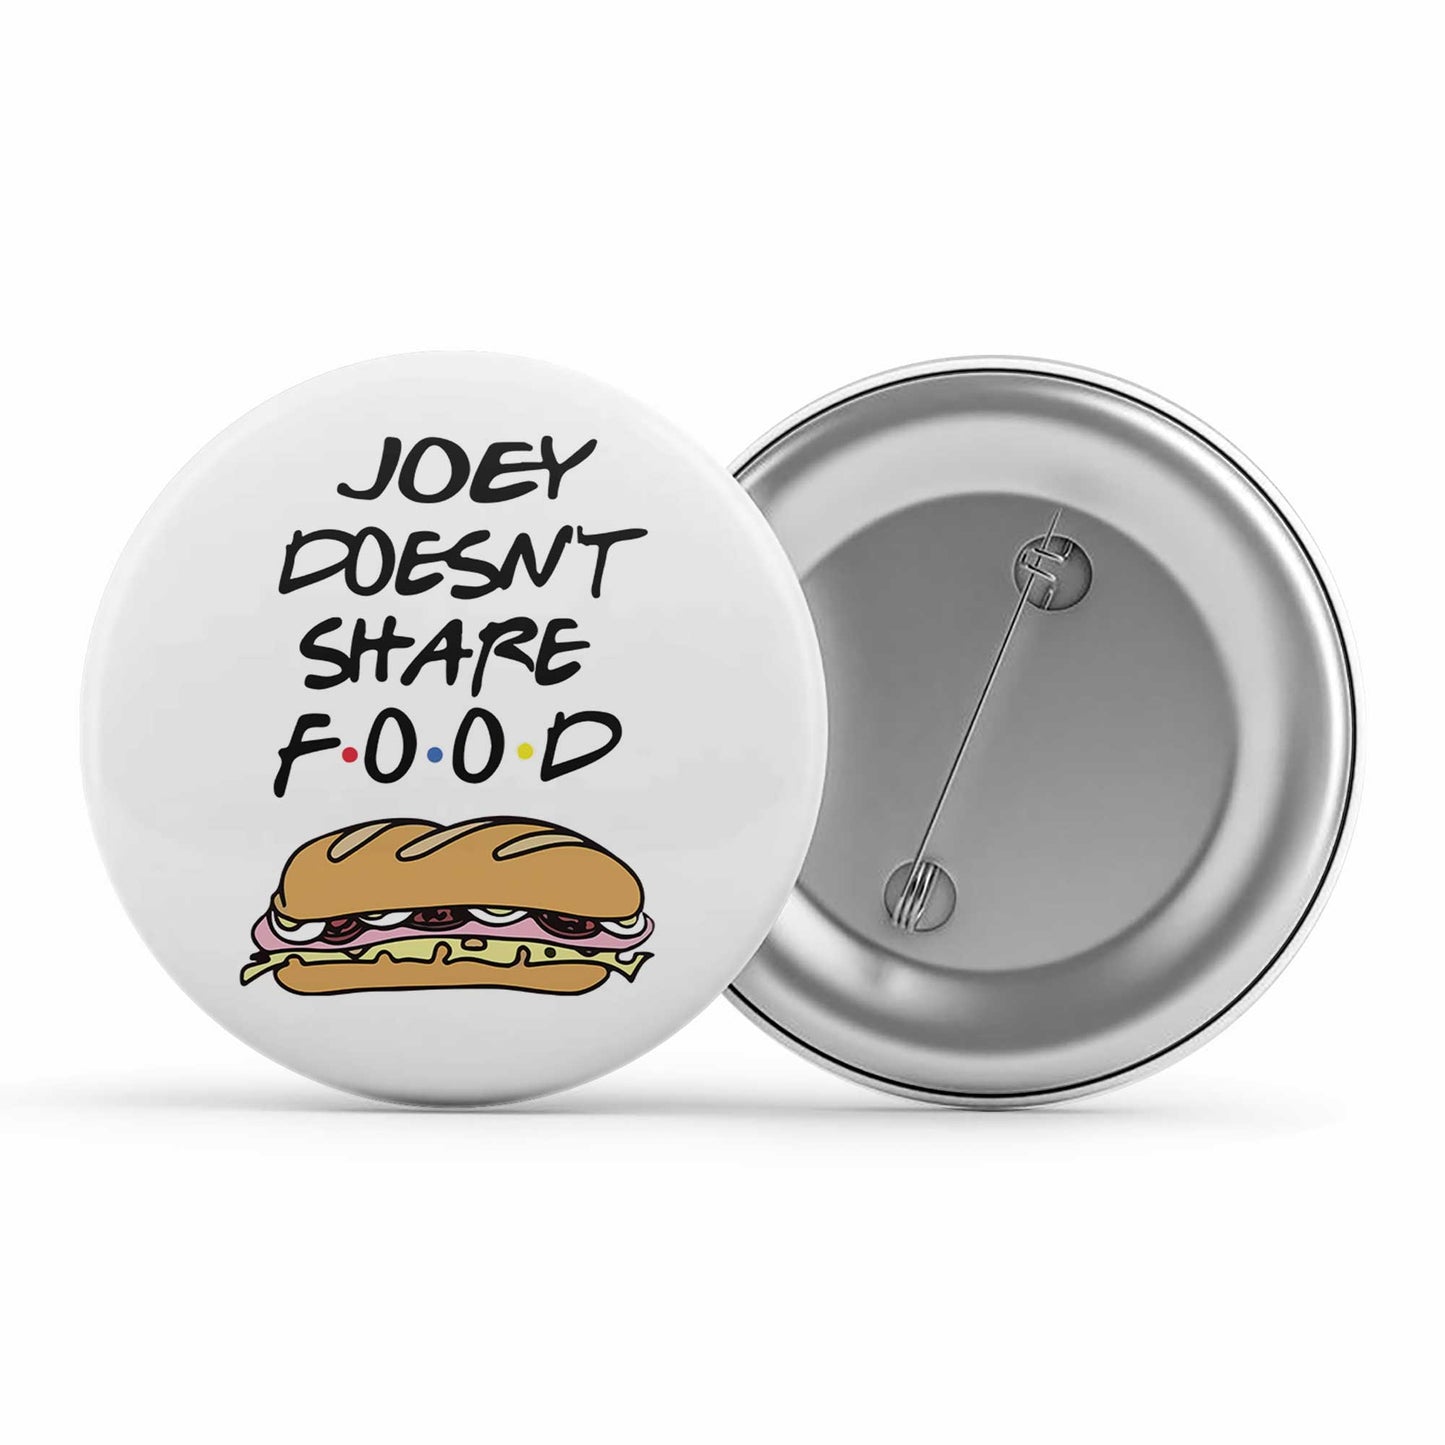 Friends Badge - Joey Doesn't Share Food Metal Pin Button The Banyan Tee TBT